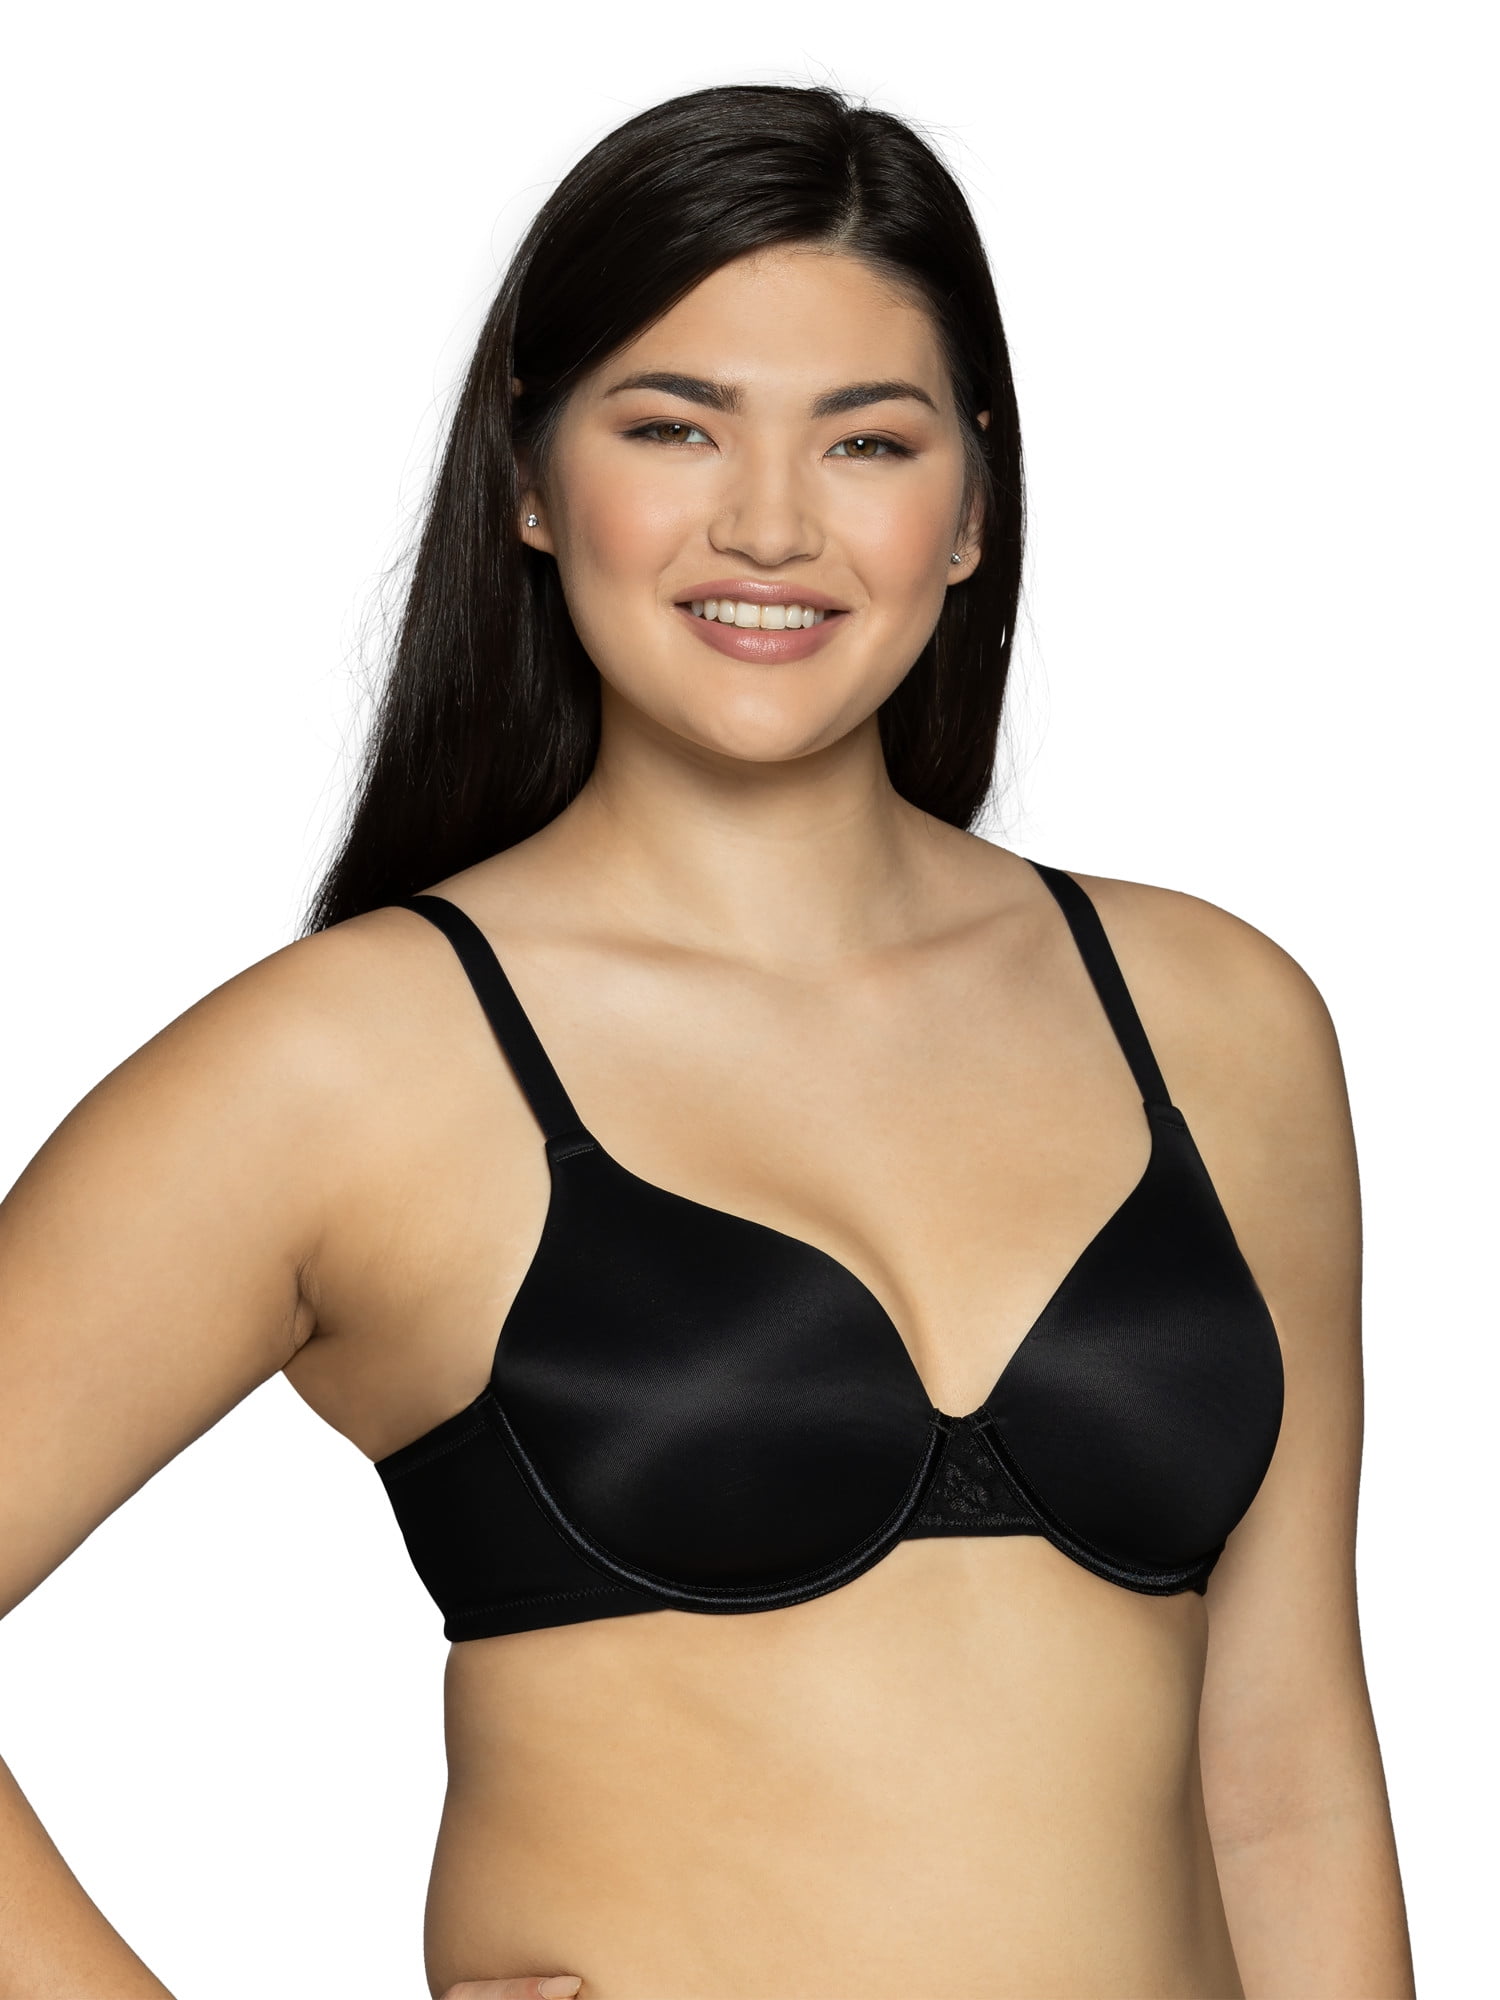 Vanity Fair Radiant Collection Women's Full Figure Lightly Lined